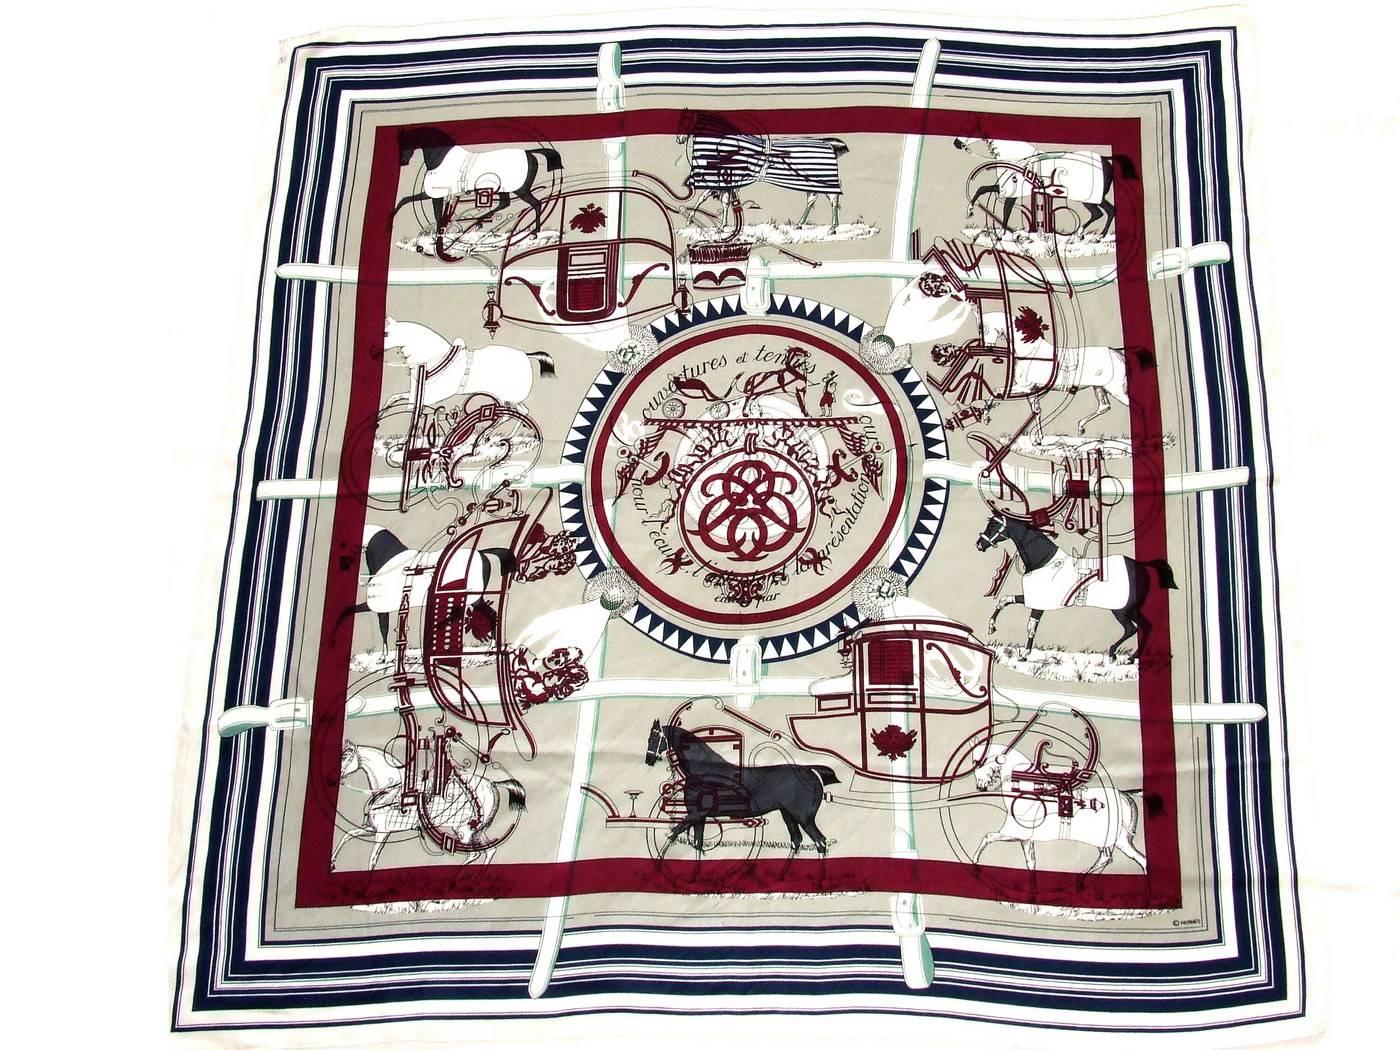 BEAUTIFUL AUTHENTIC HERMES SCARF

Called 